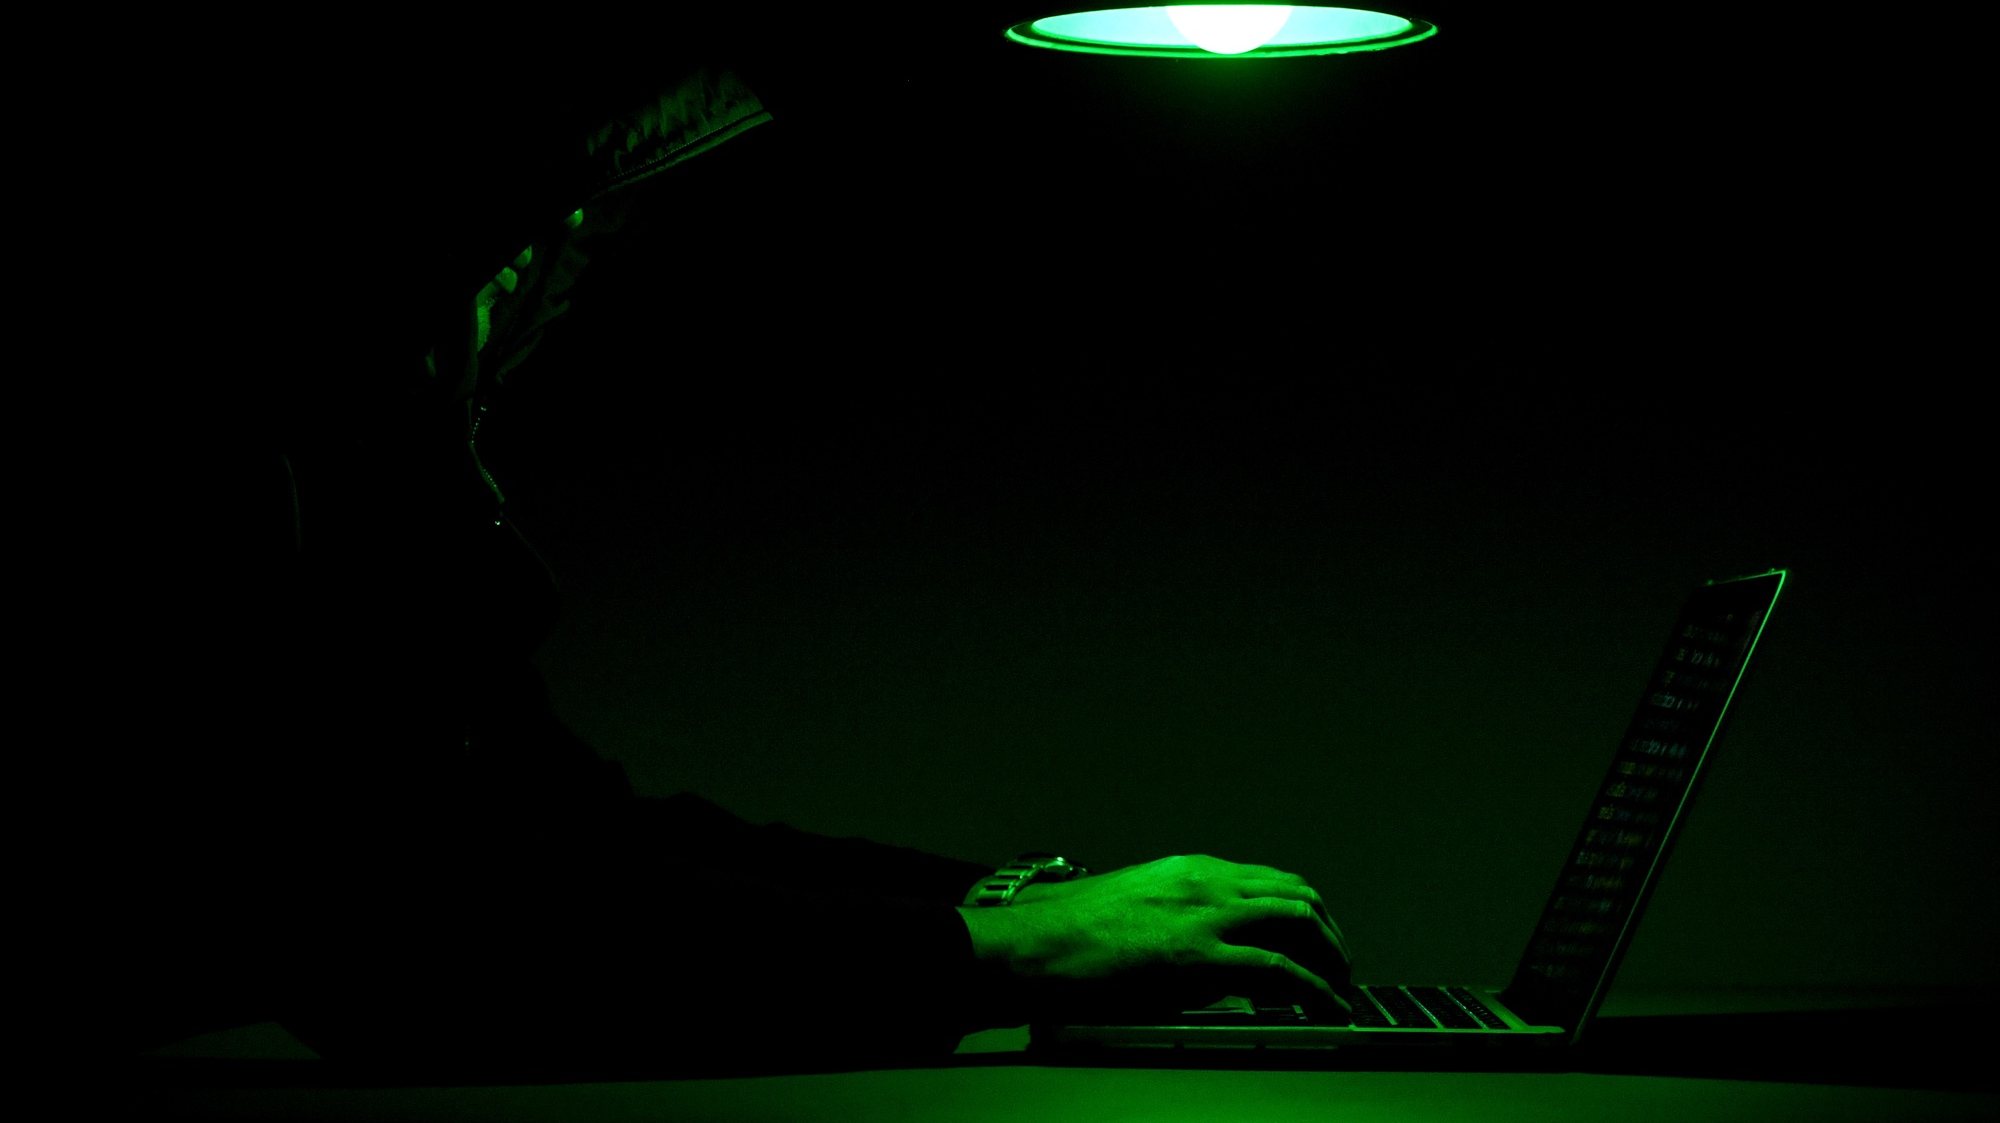 epa07261856 ILLUSTRATION - A person sits in front of a computer screen in Moers, Germany, 04 January 2019. Reports on 04 January 2019 state personal data of hundreds of German politicians, celebrities and journalists have been hacked and posted online. The compromised data reportedly includes credit card details, private chat protocols and contact information. The data was allegedly shared via a Twitter account under the name G0d (@_0rbit) prior to Christmas 2018, which has been suspended in the meantime.  EPA/SASCHA STEINBACH